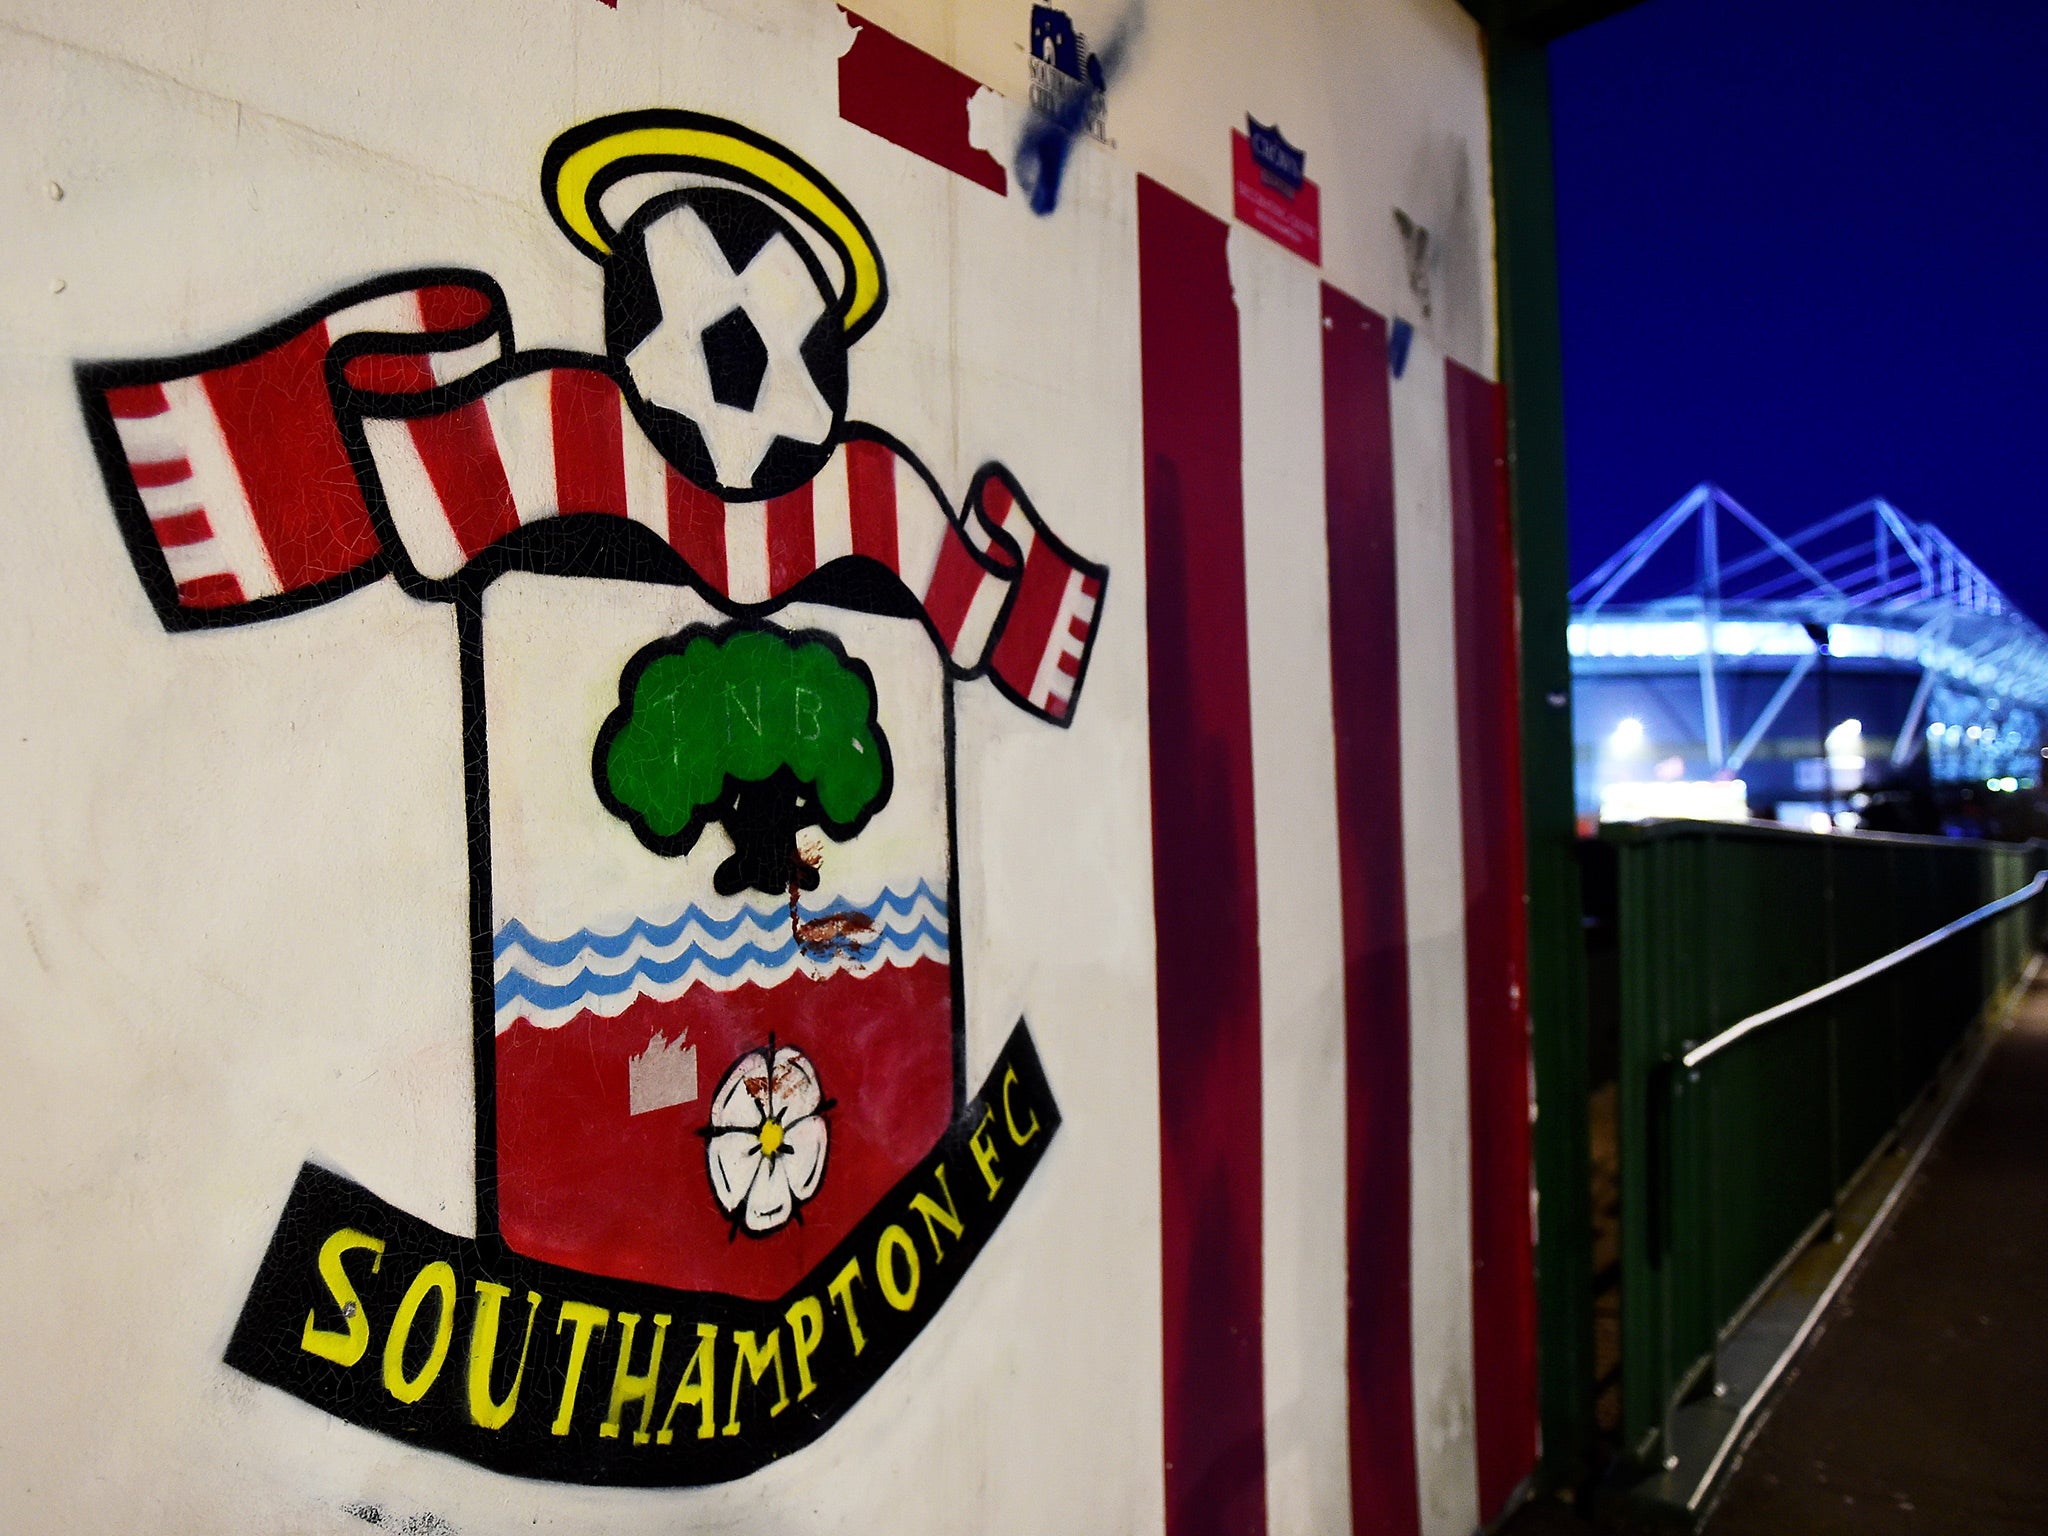 Southampton have become the latest club to be embroiled in the child sexual abuse scandal in football